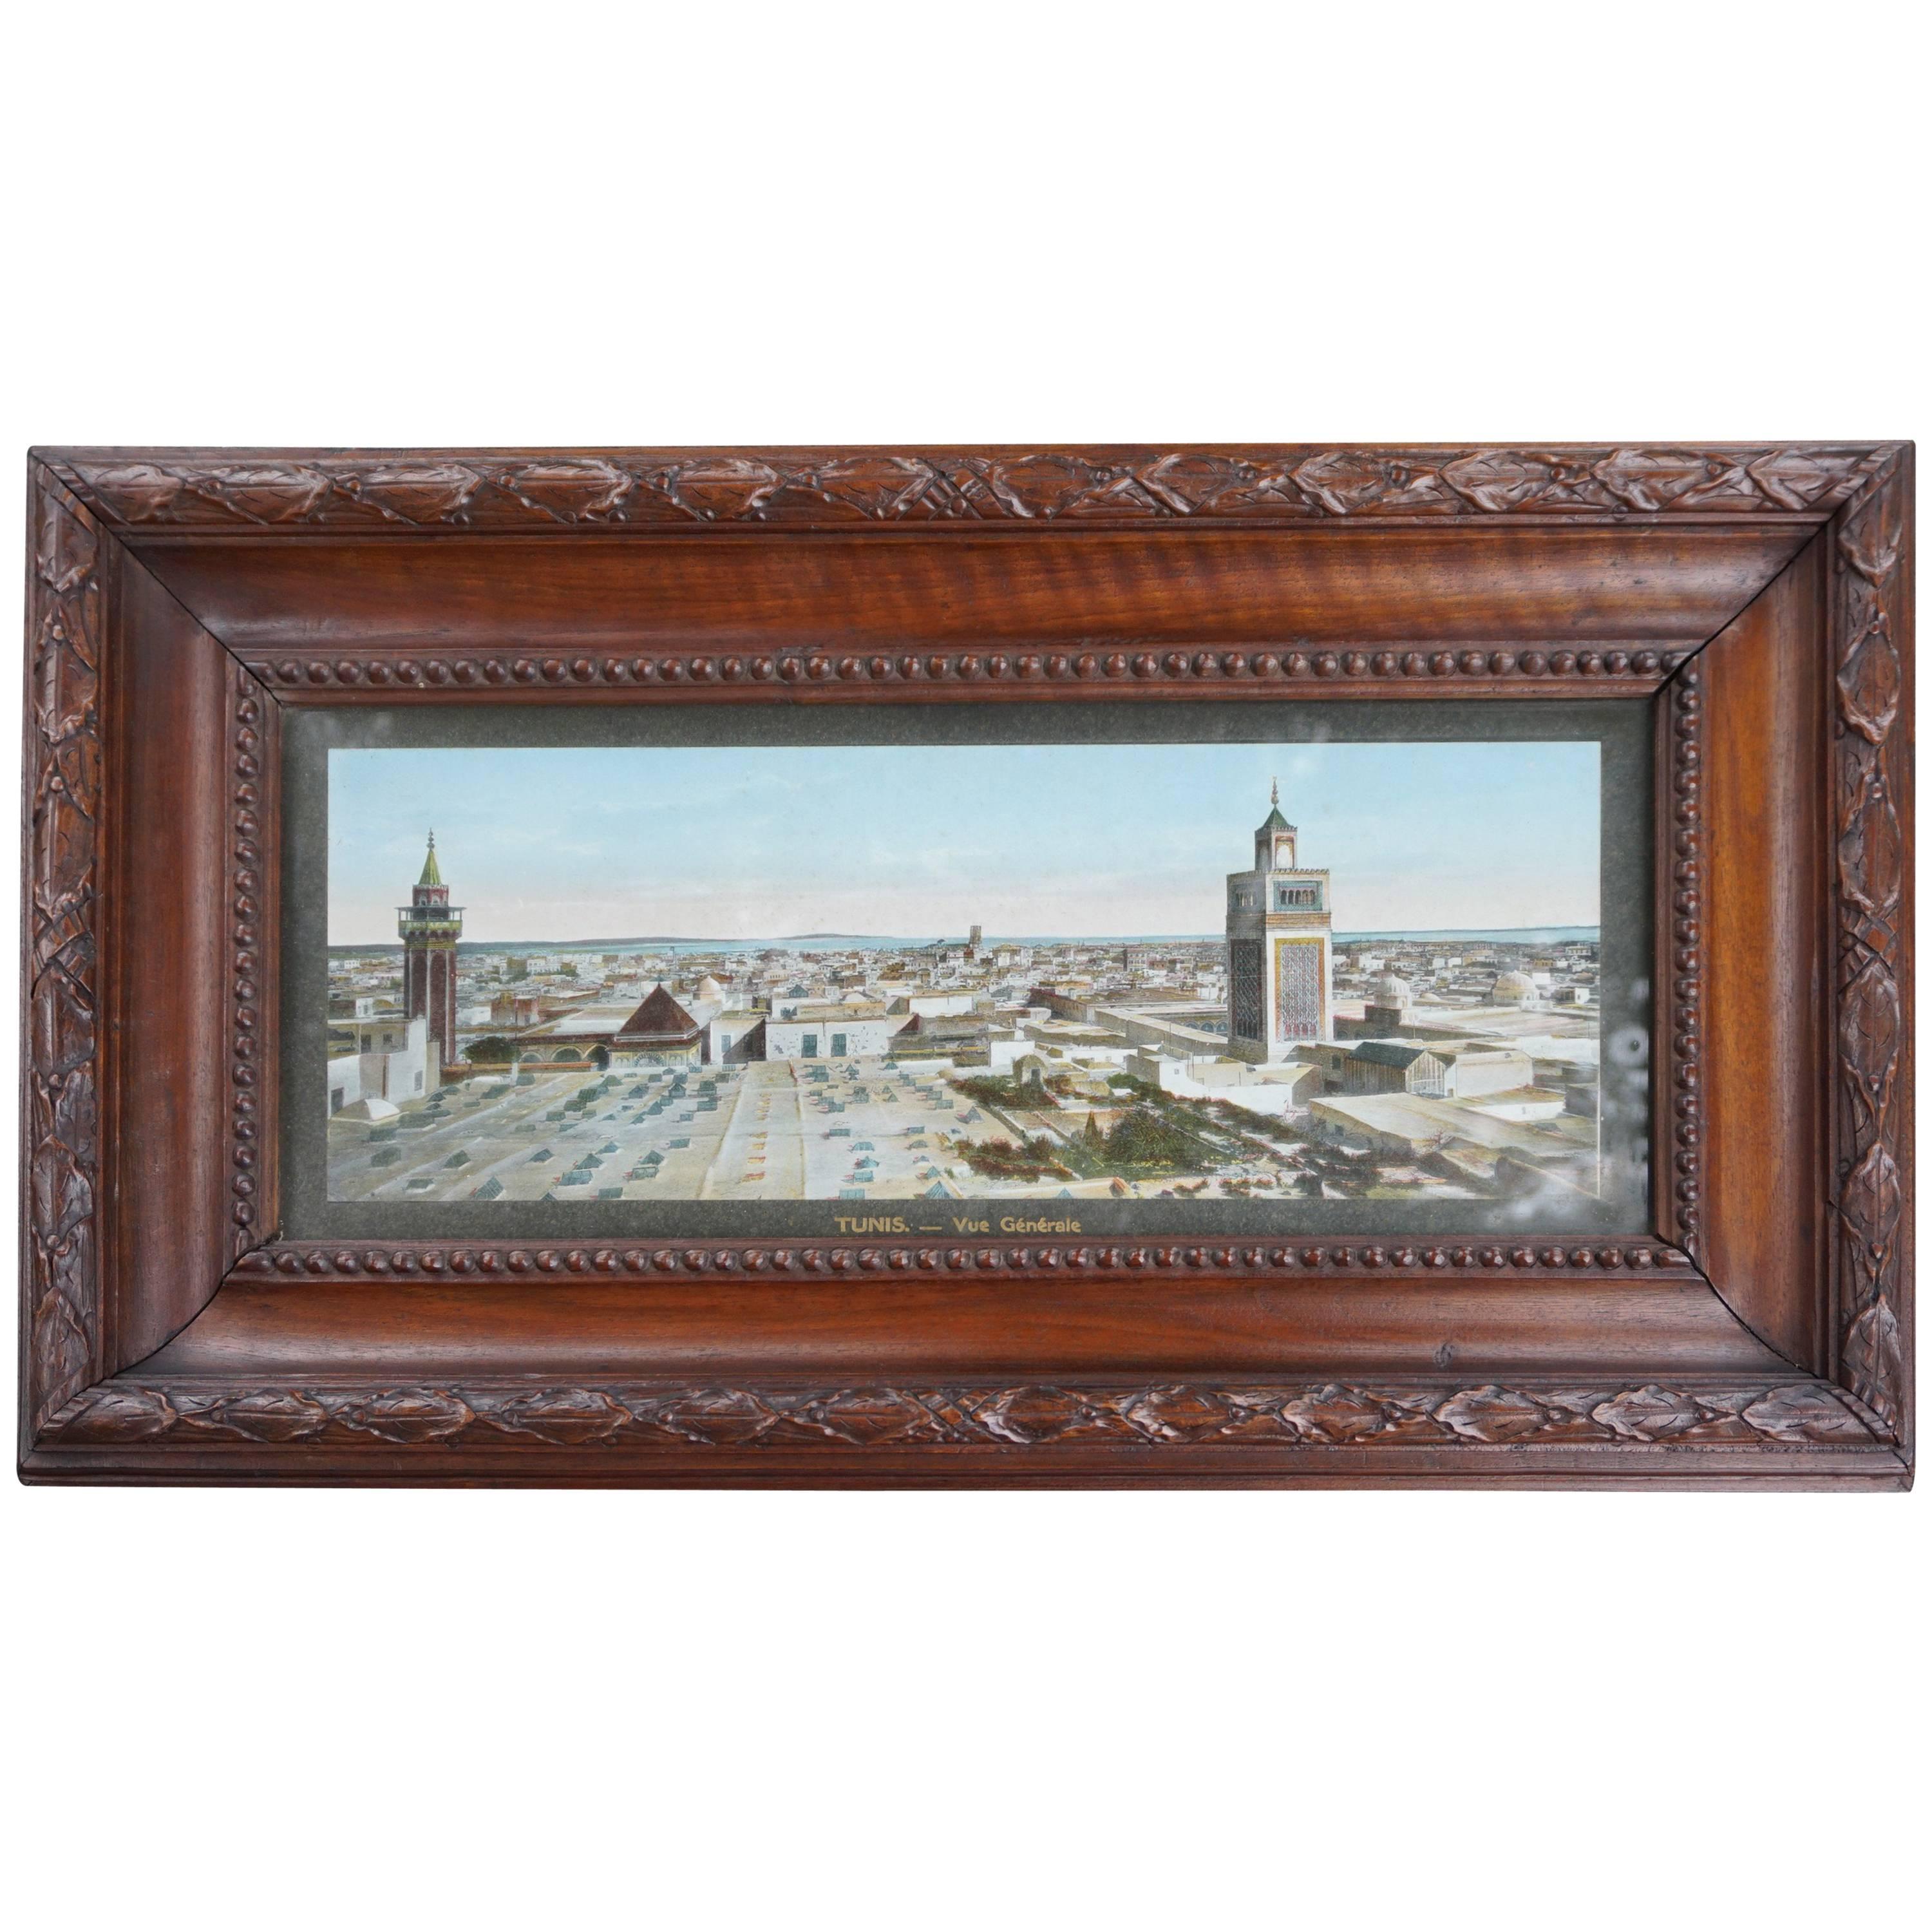 Antique & Unique French Colonial Walnut Picture Frame with Tunis Skyline Picture For Sale